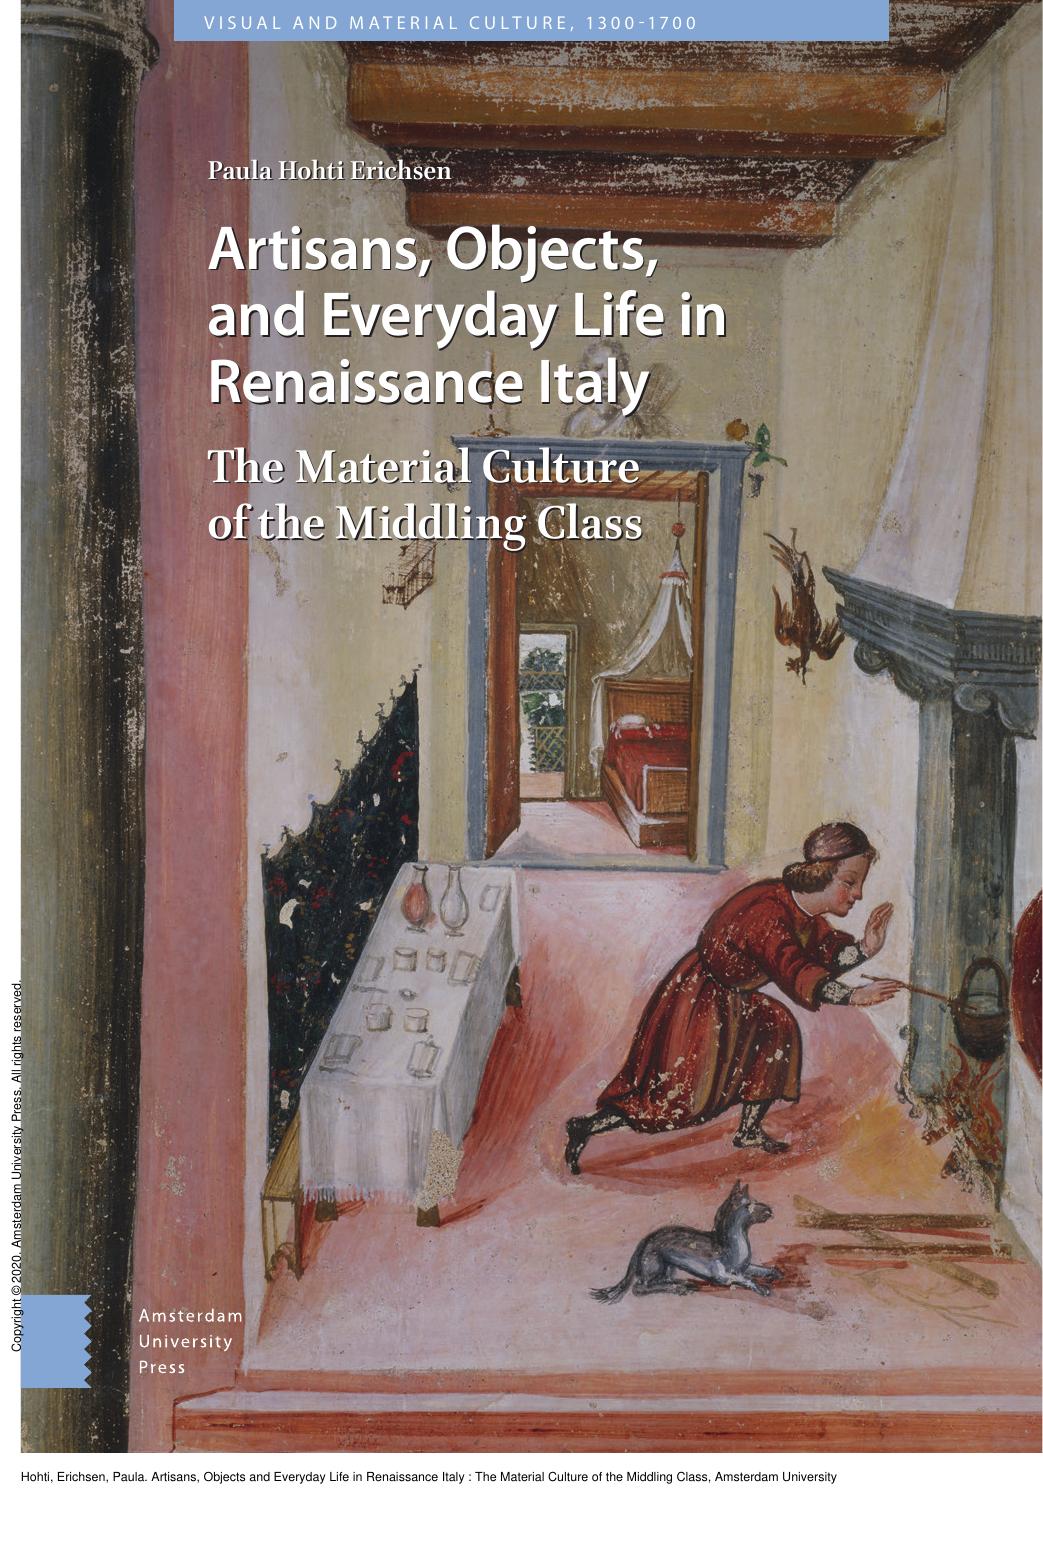 Artisans, Objects and Everyday Life in Renaissance Italy : The Material Culture of the Middling Class by Paula Hohti Erichsen